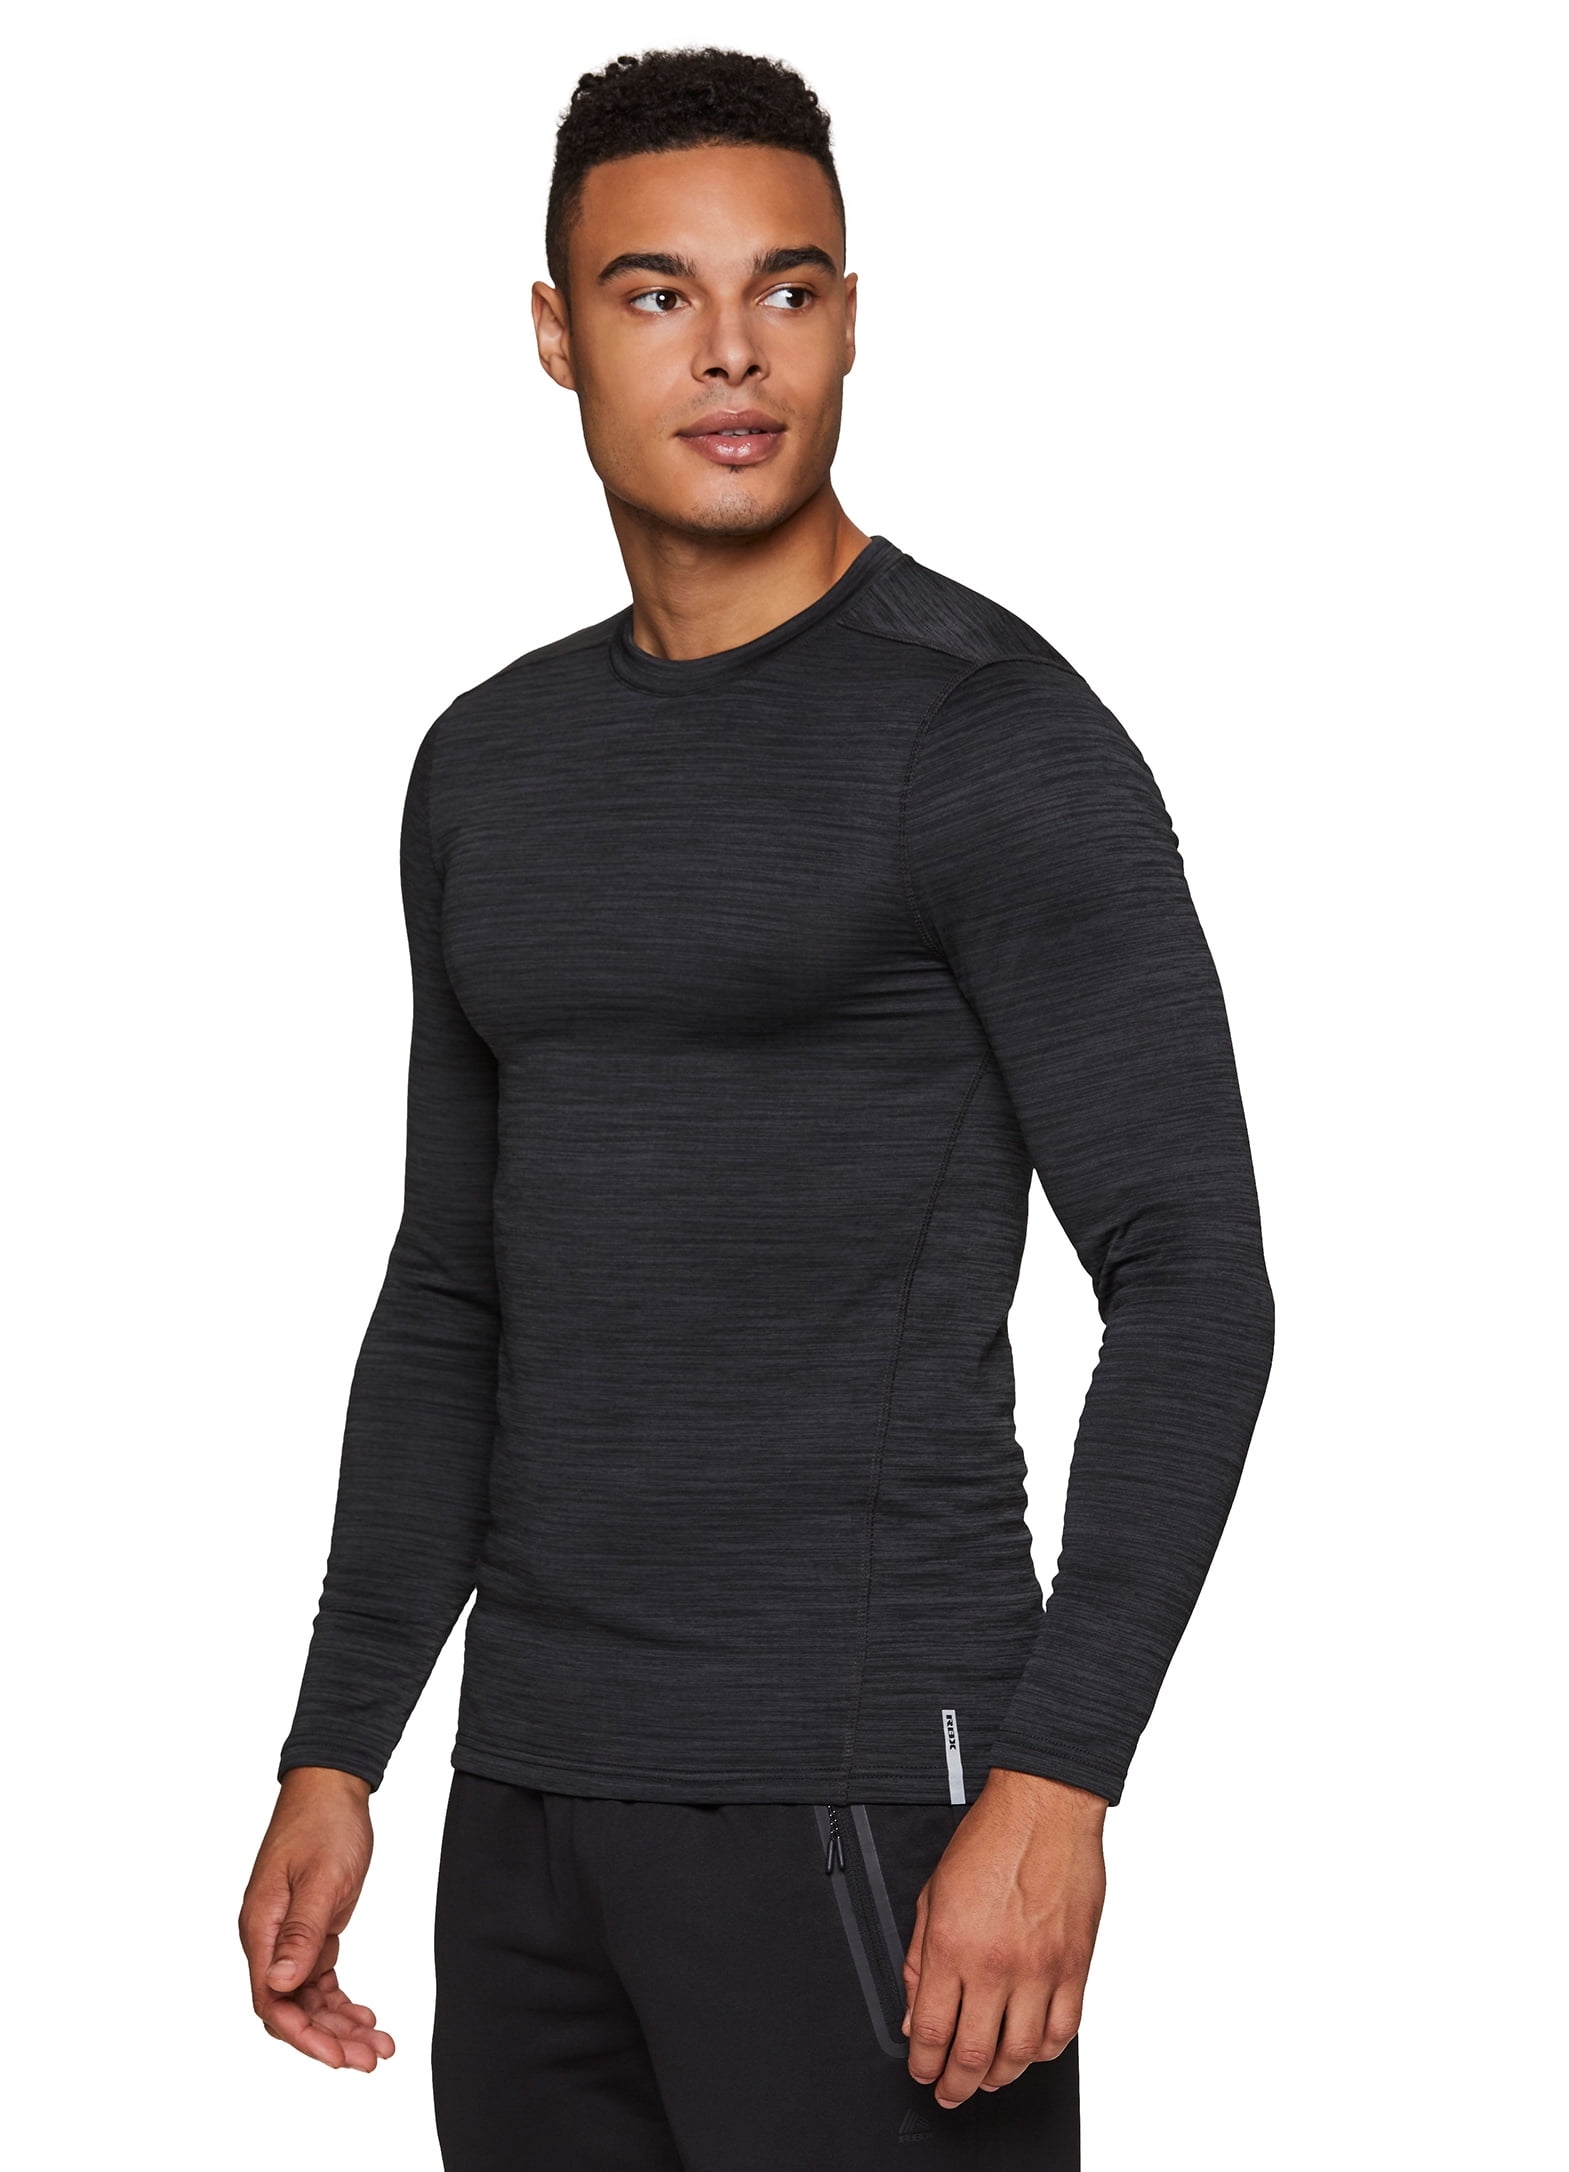 RBX Active Men's Athletic Performance Long Sleeve Crew Neck Fleece Lined Insulated Fitted Base Layer T-Shirt